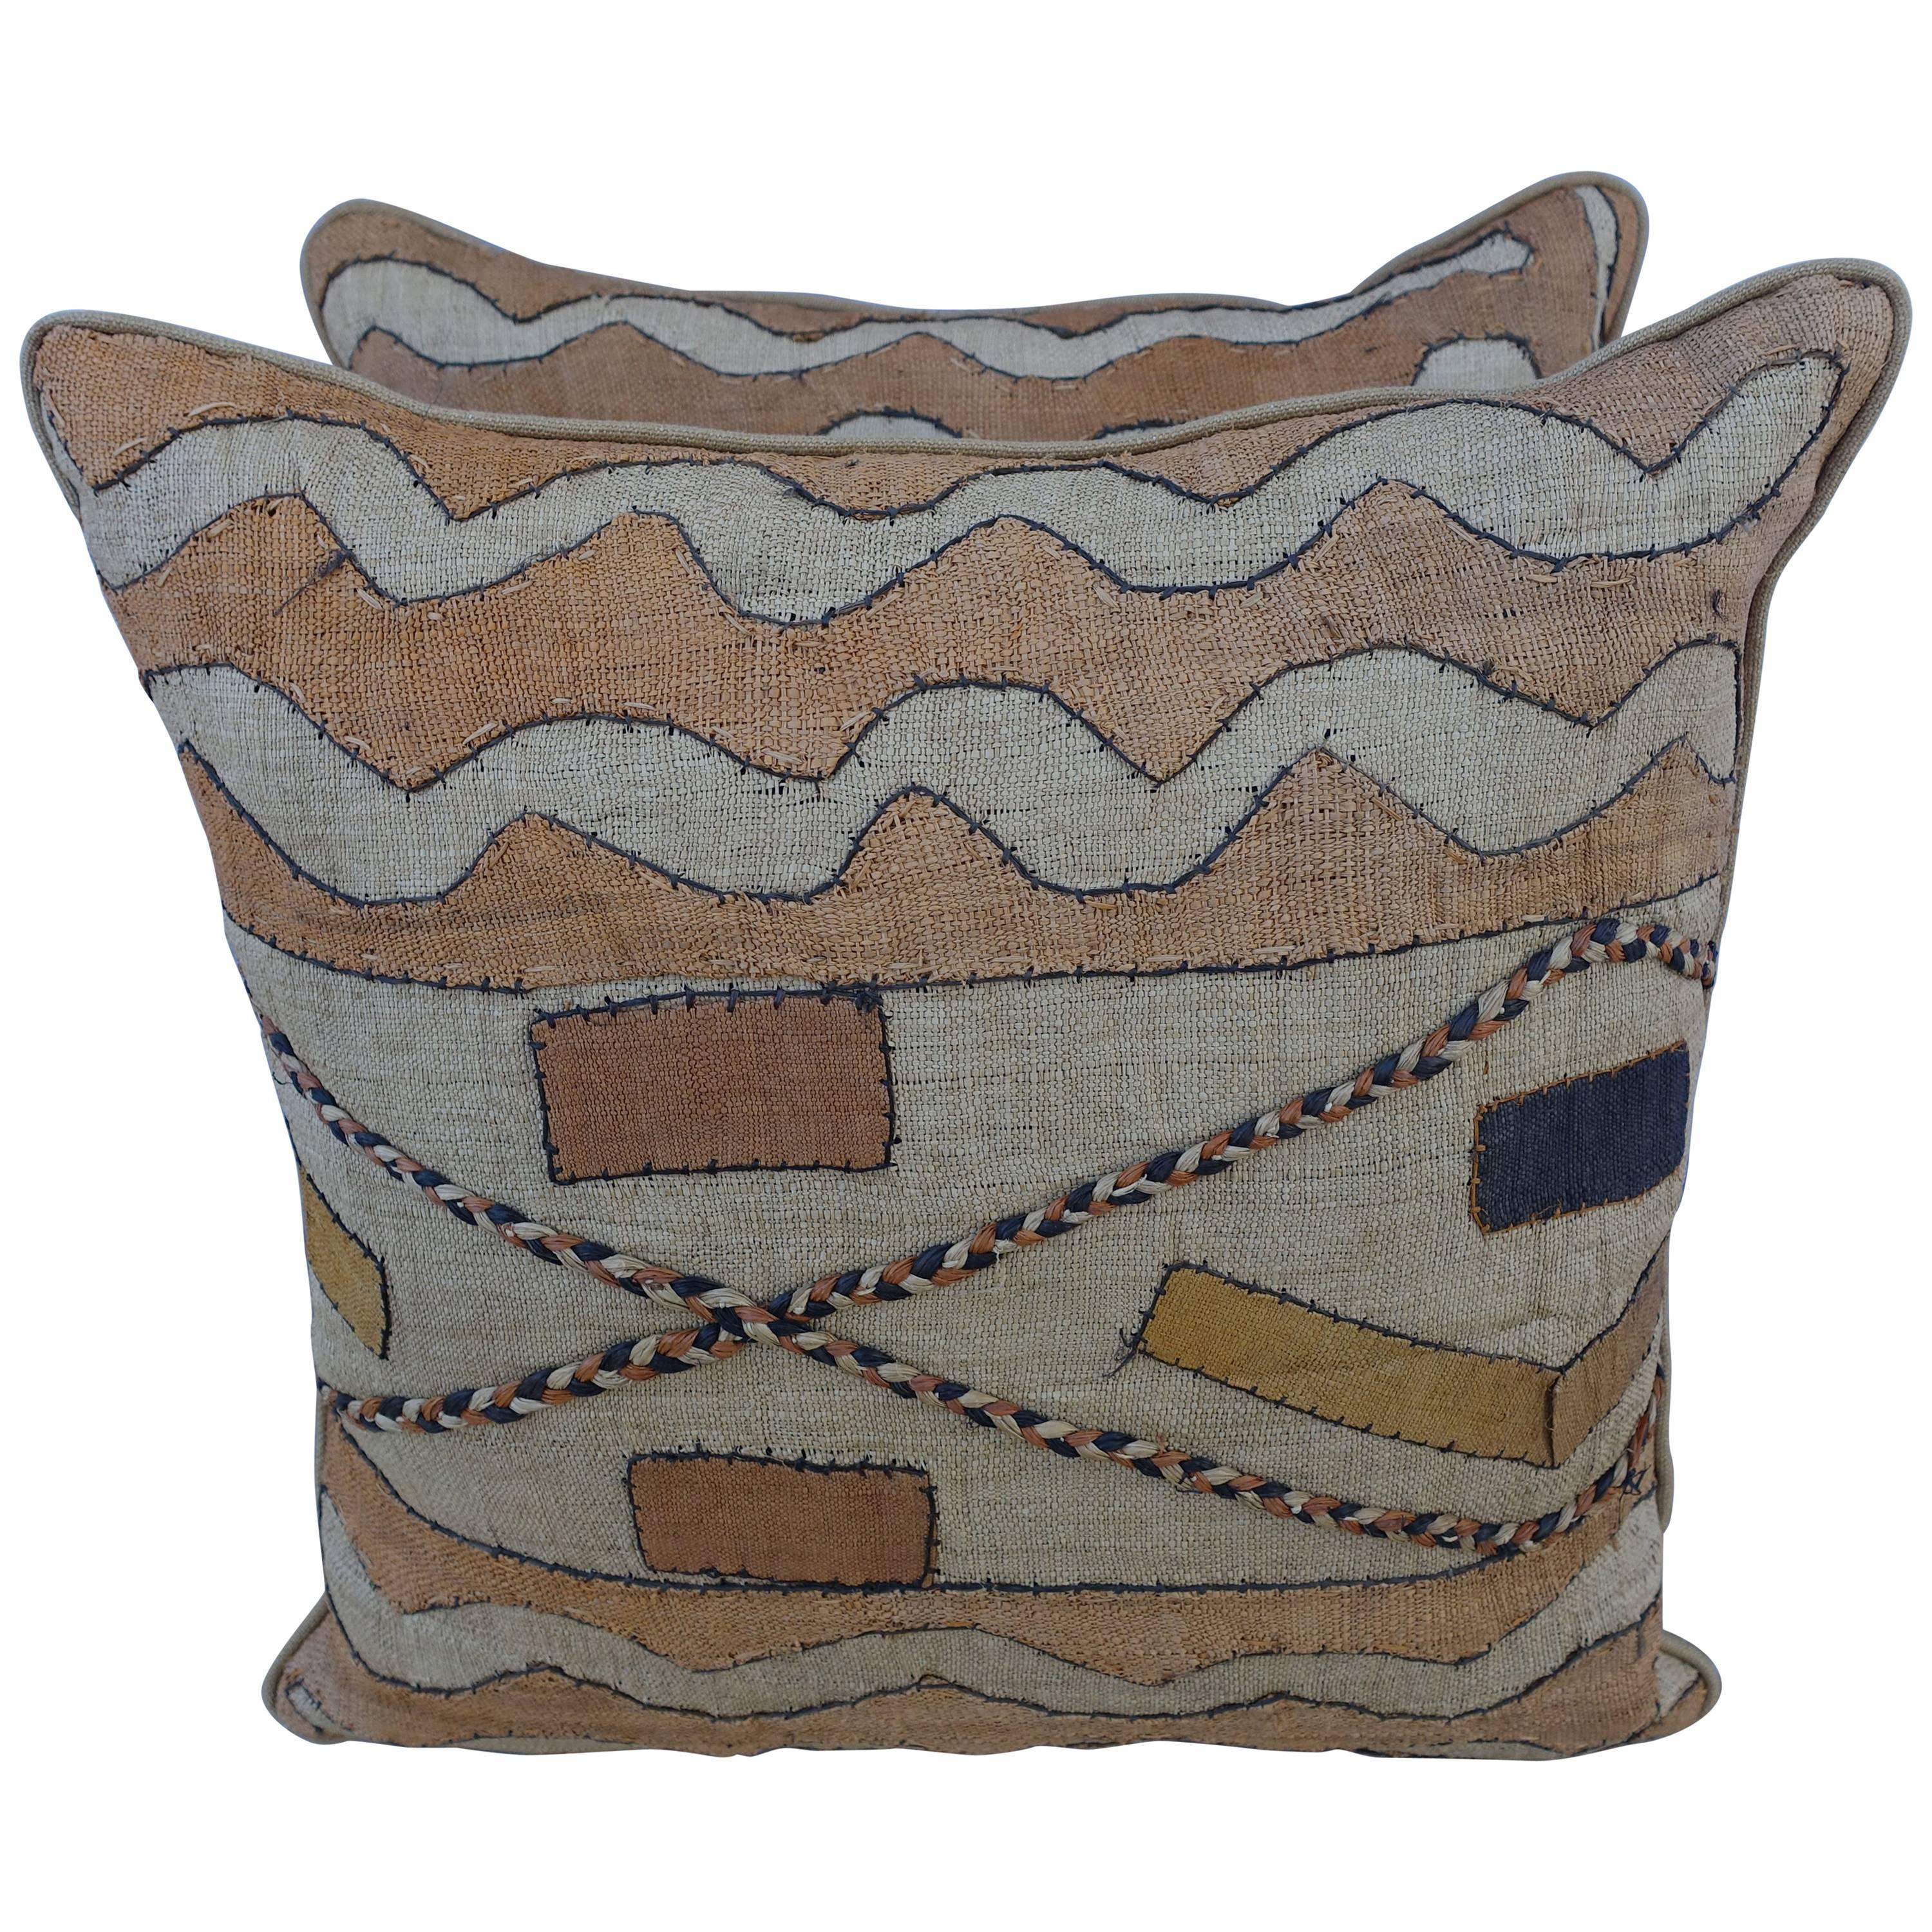 African Kuba Cloth Pillows by Melissa Levinson